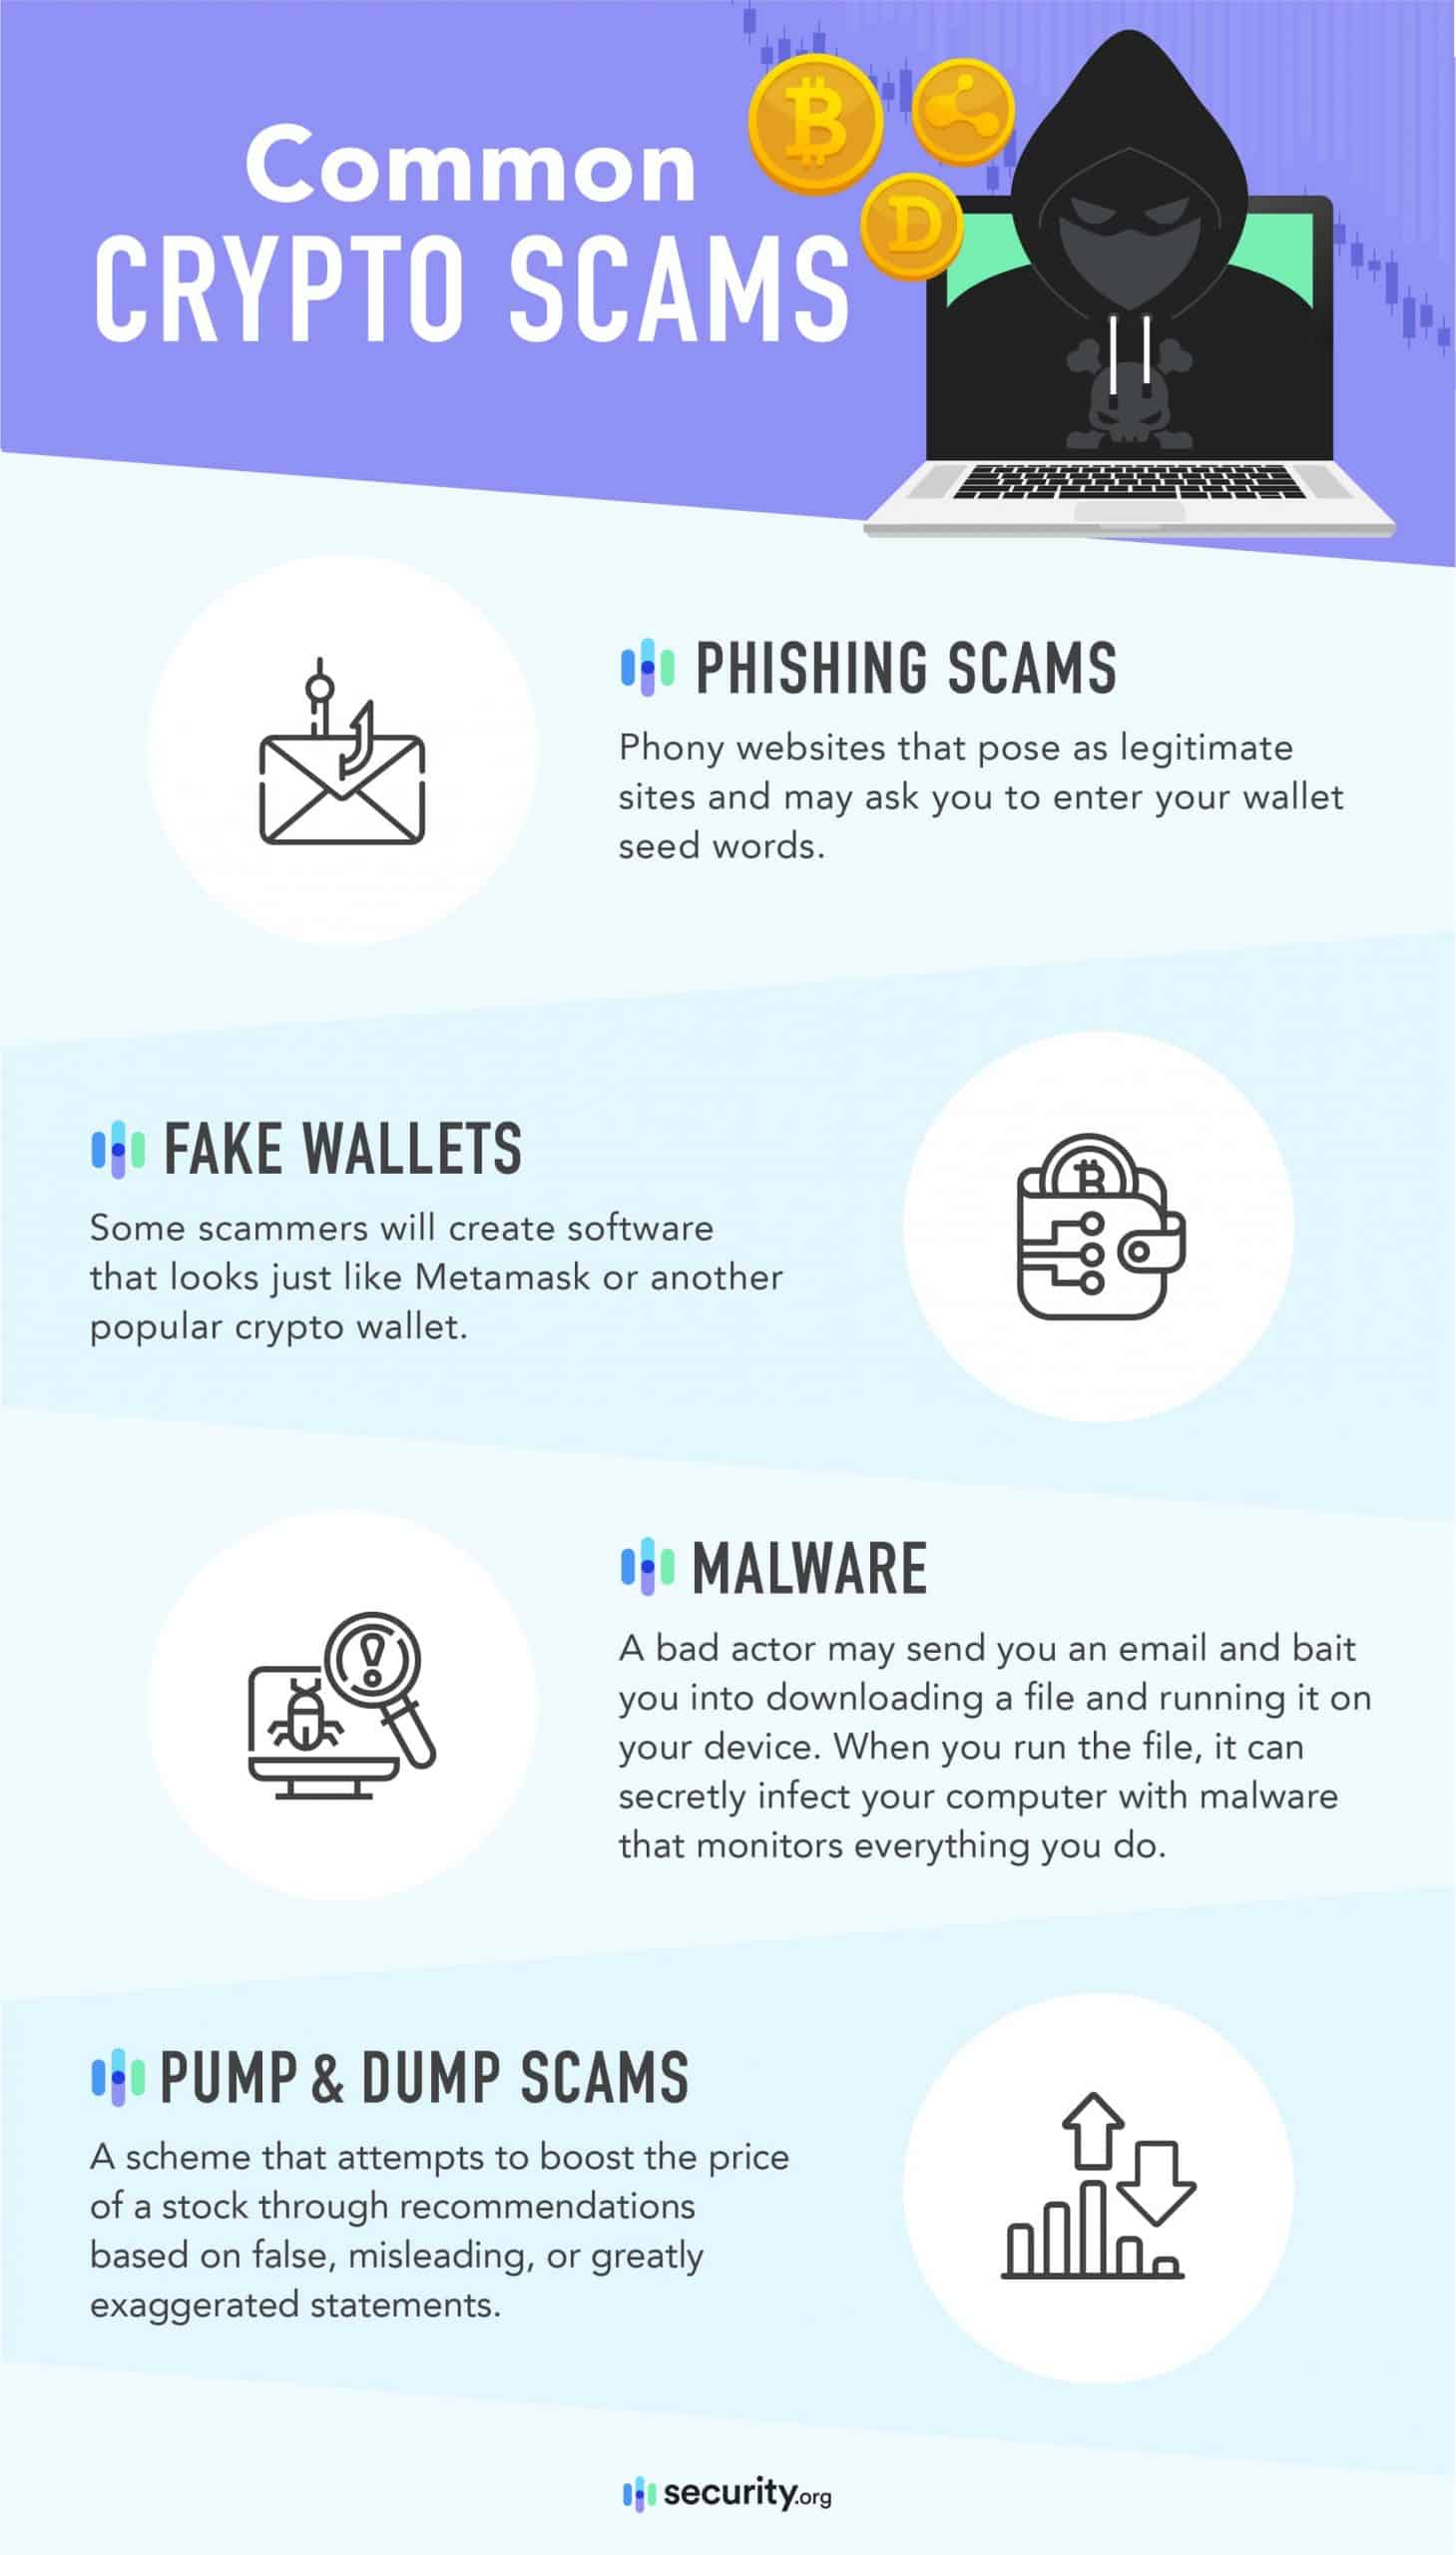 Common Crypto scams to watch out for